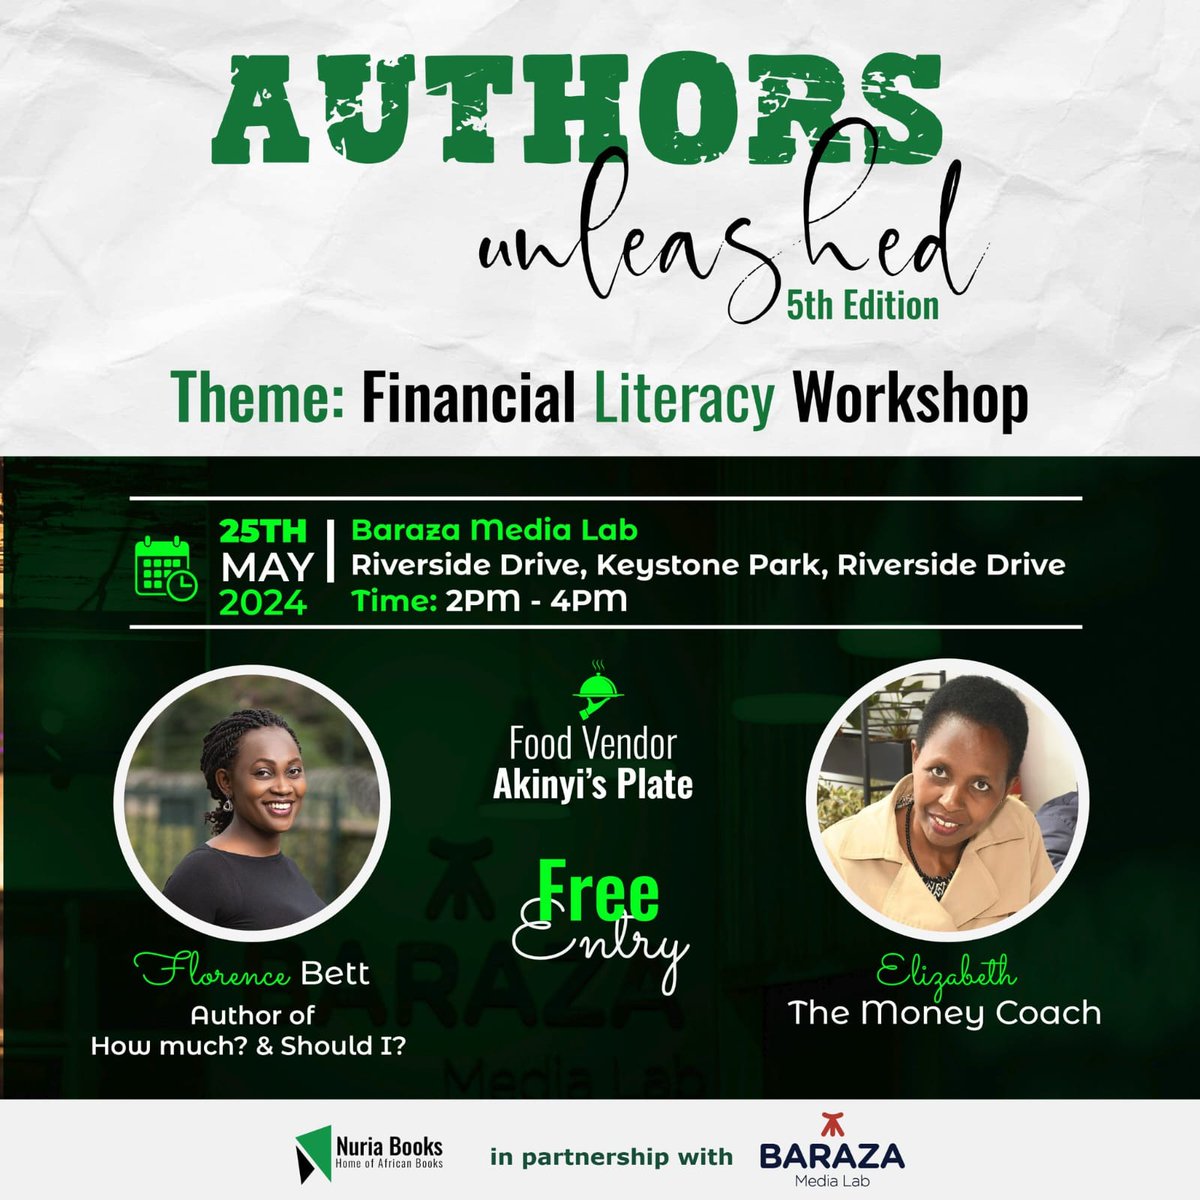 Take control of your finances! Join @NuriaStore on Sat, May 25 at 2:00 PM at @BarazaLab Media Lab for 'Financial Literacy 101'

Learn how to budget, spend wisely, and plan for your future. Get your tickets now! eventbrite.com/e/financial-li…

#FinancialLiteracy #MoneyManagement